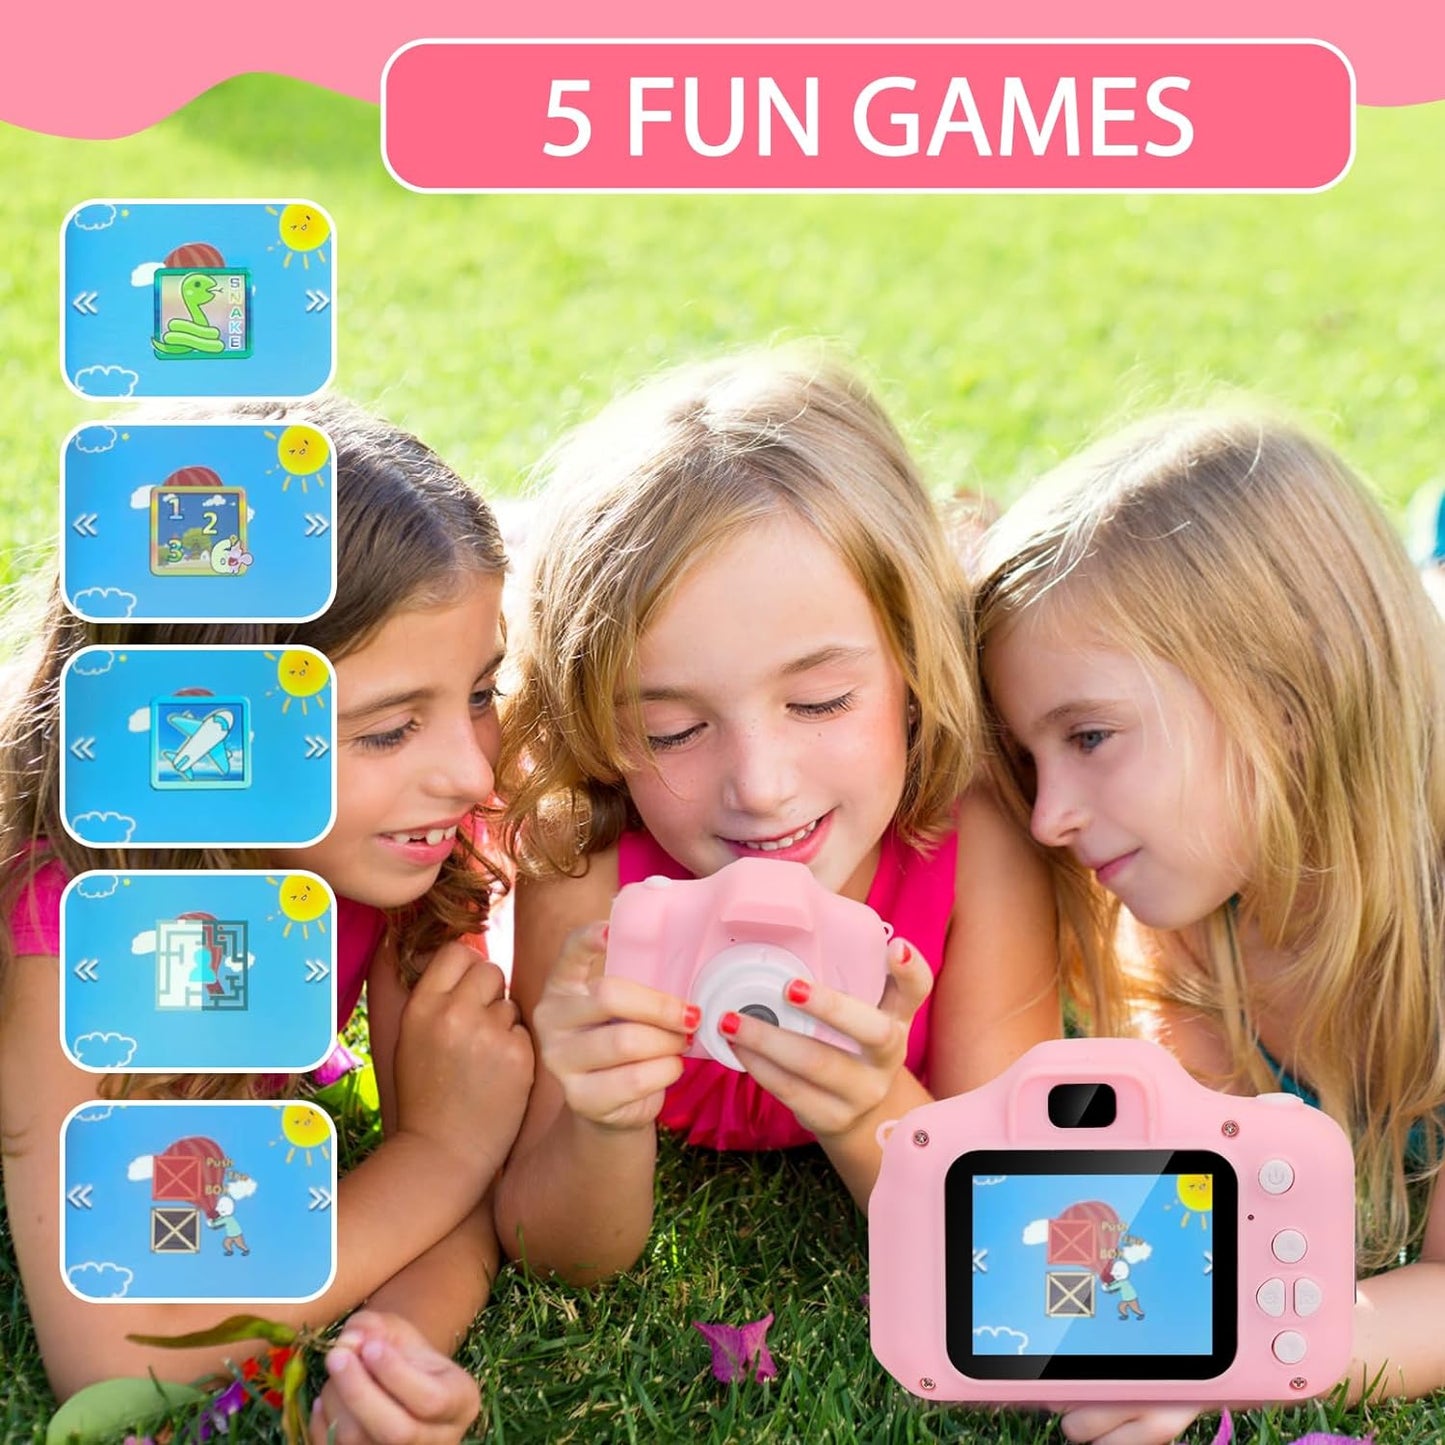 Kids Camera - HD Autofocus, 13MP, 1080P Video, 2000 Photos, Fun Frames,Games for Girls, Toddlers - Birthday Gift, Kids Toys-Pink